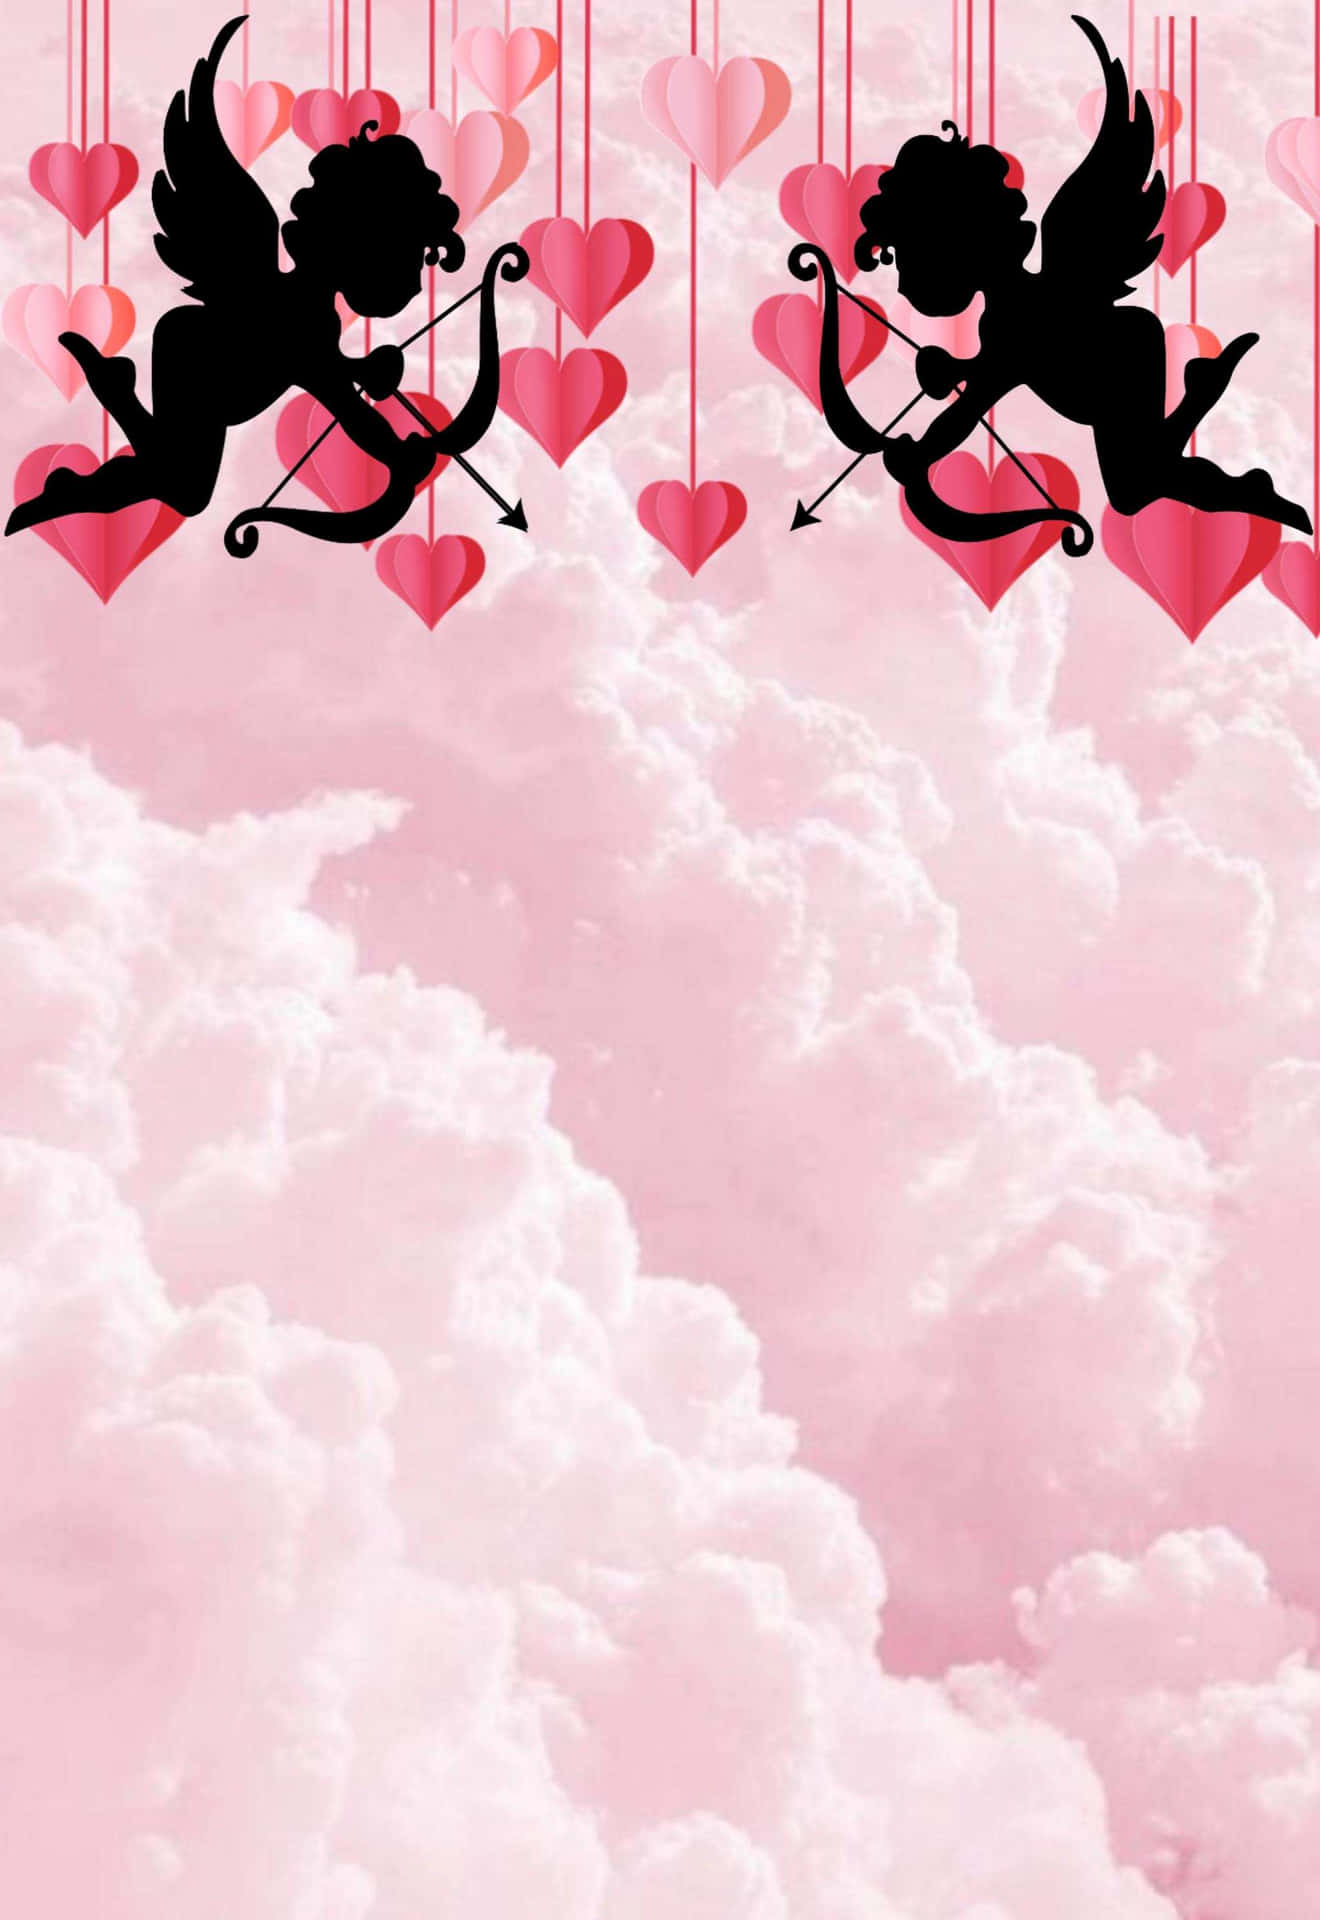 Cupid Silhouettes Clouds Hearts Background Background